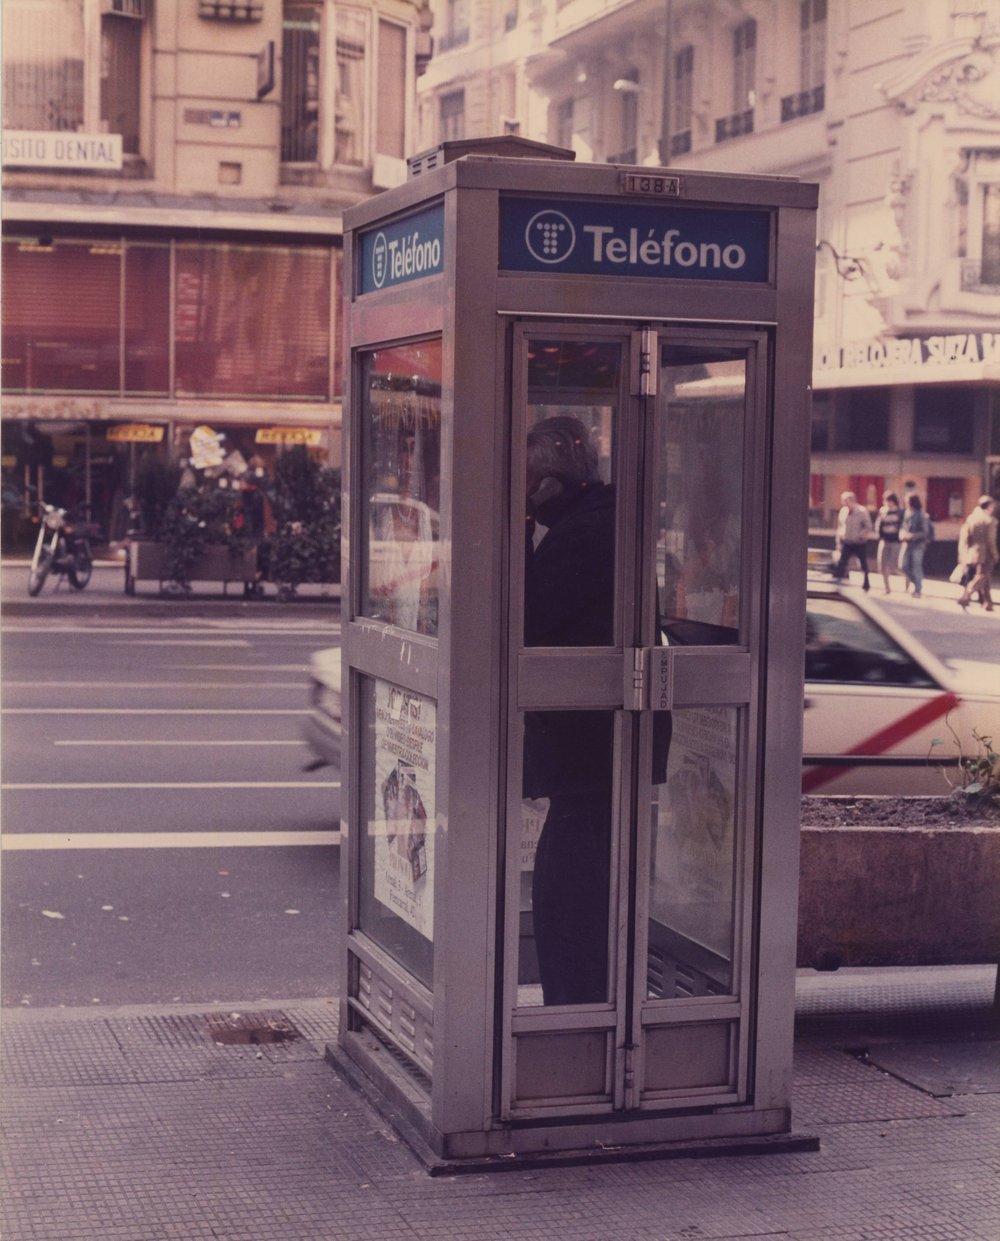 TELEPHONE BOOTH ON MADRID'S GRAN VIA DURING THE 1980S